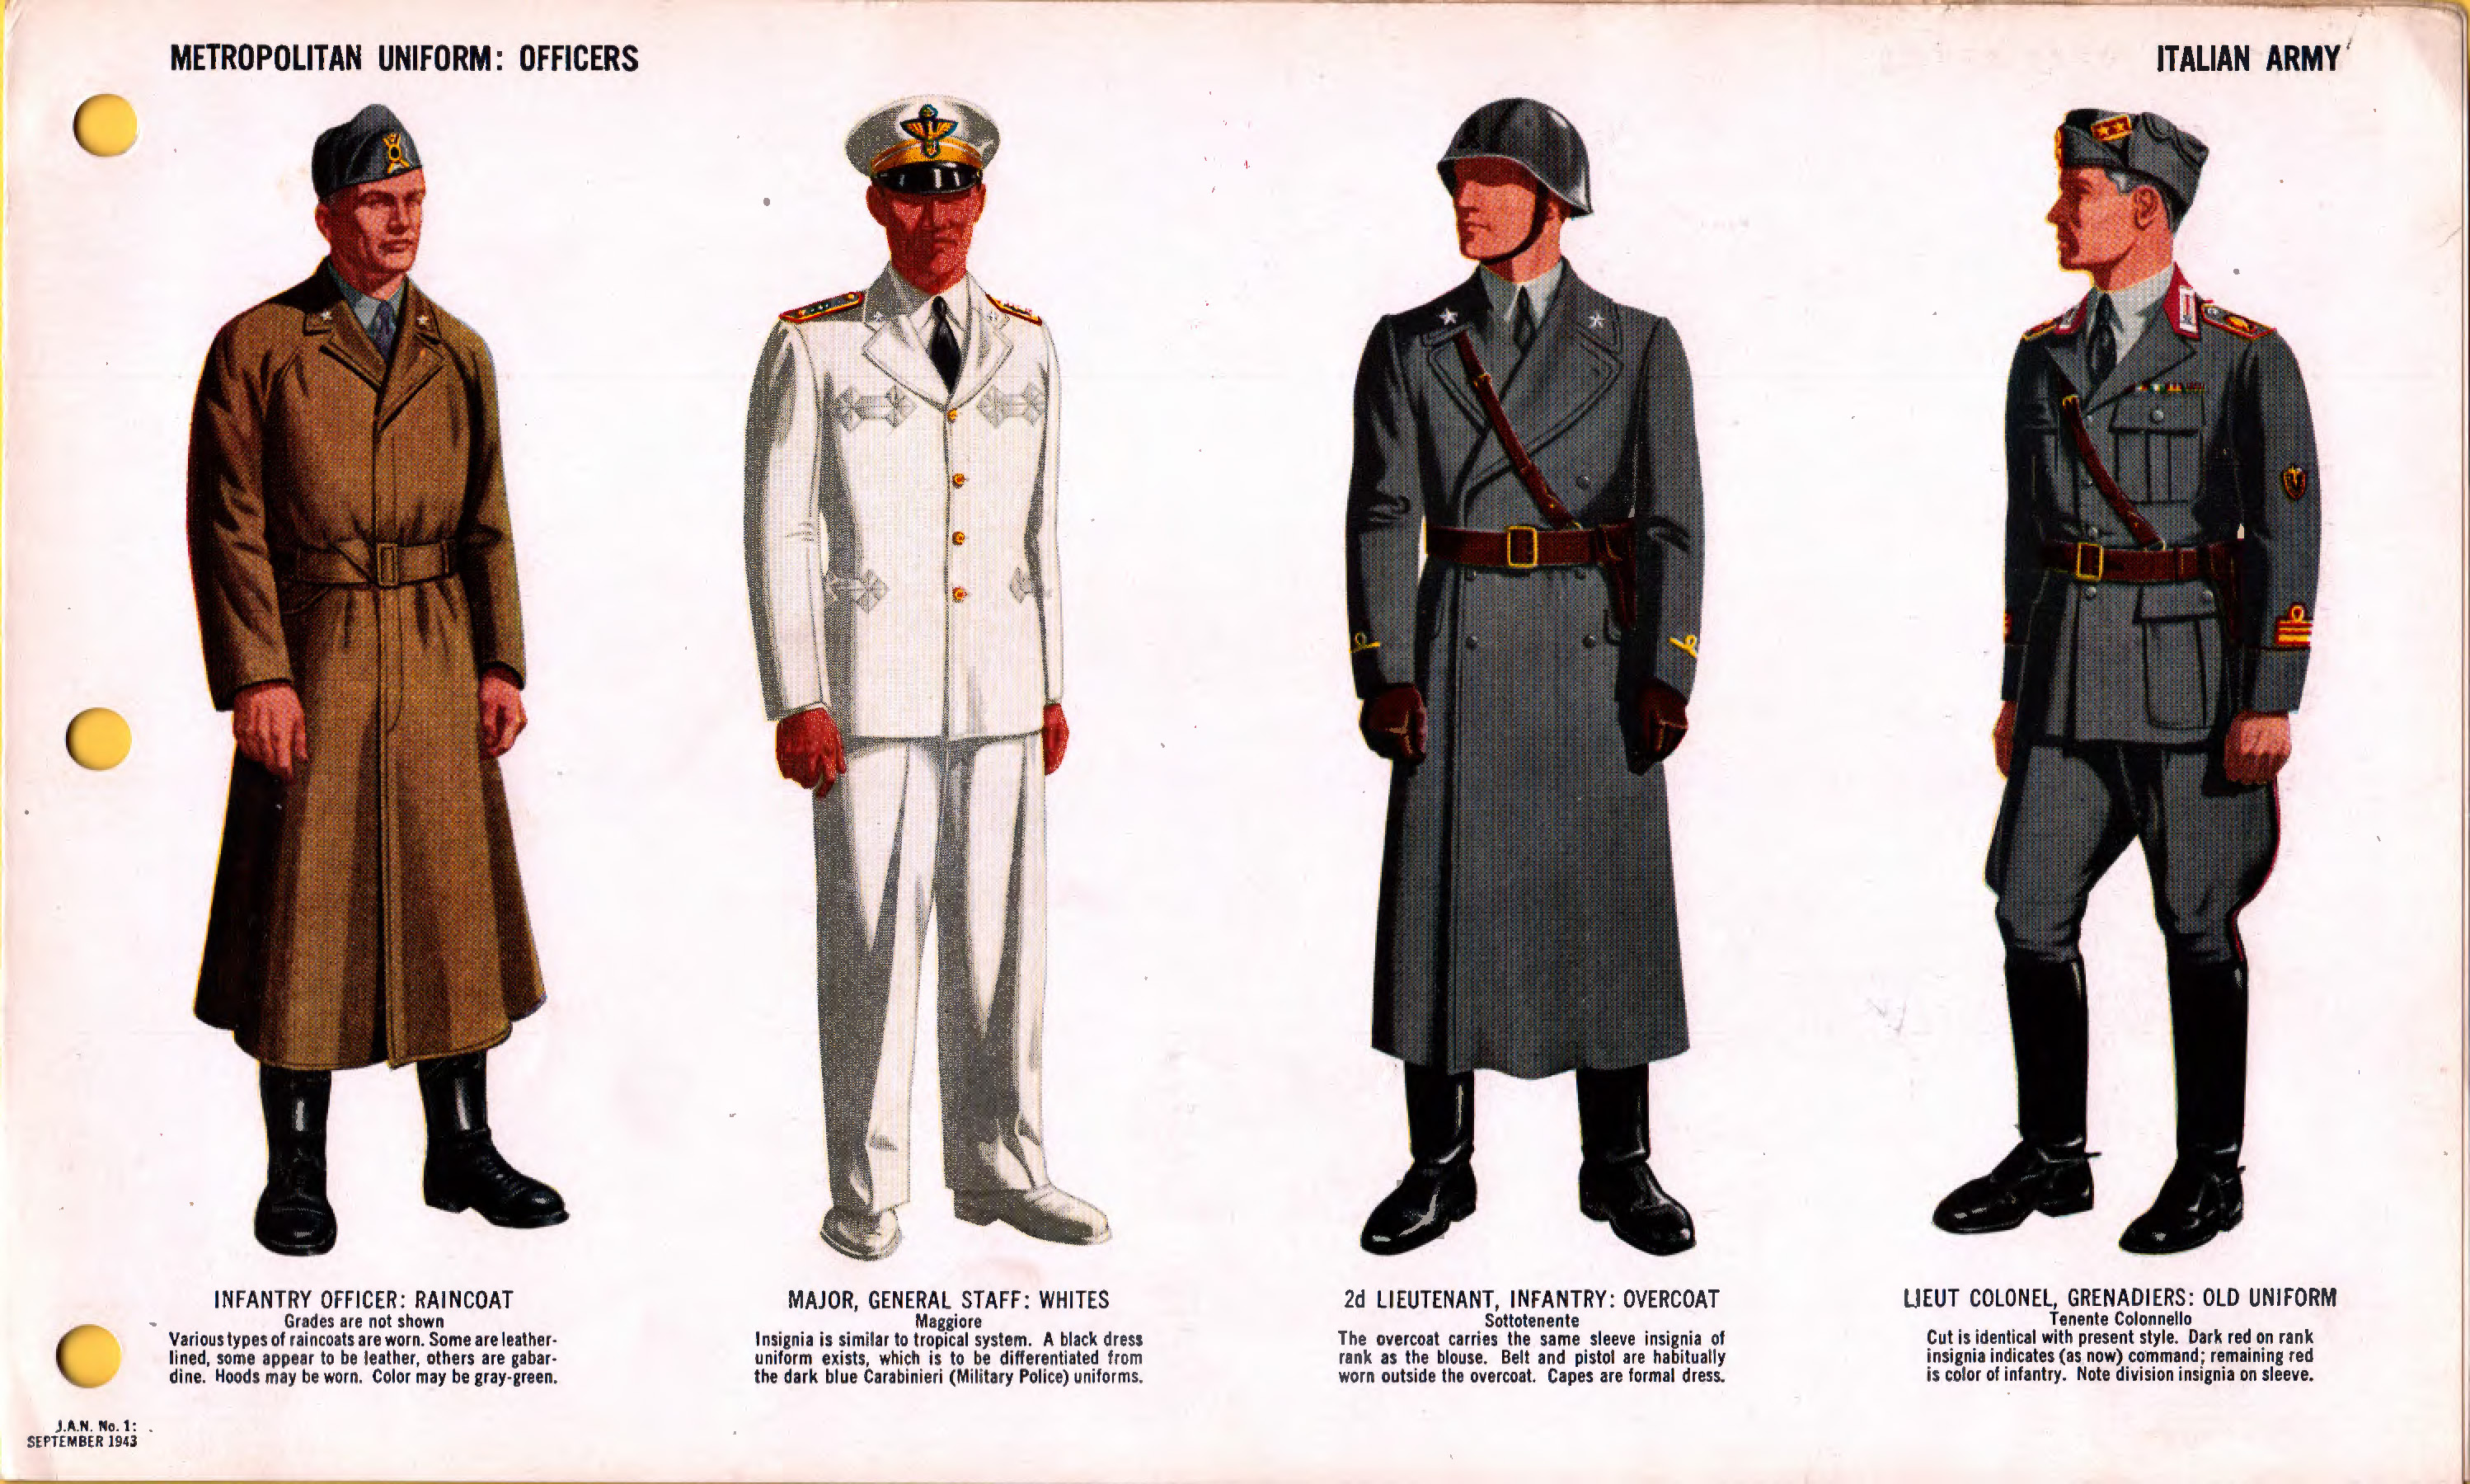 File:ONI JAN 1 Uniforms and Insignia Page 060 Italian Army WW2 Metropolitan  uniform Officers. Raincoat, ganeral staff whites, infantry overcoat,  grenadiers old uniform, Sept 1943 US field recognition No copyright.jpg -  Wikimedia Commons